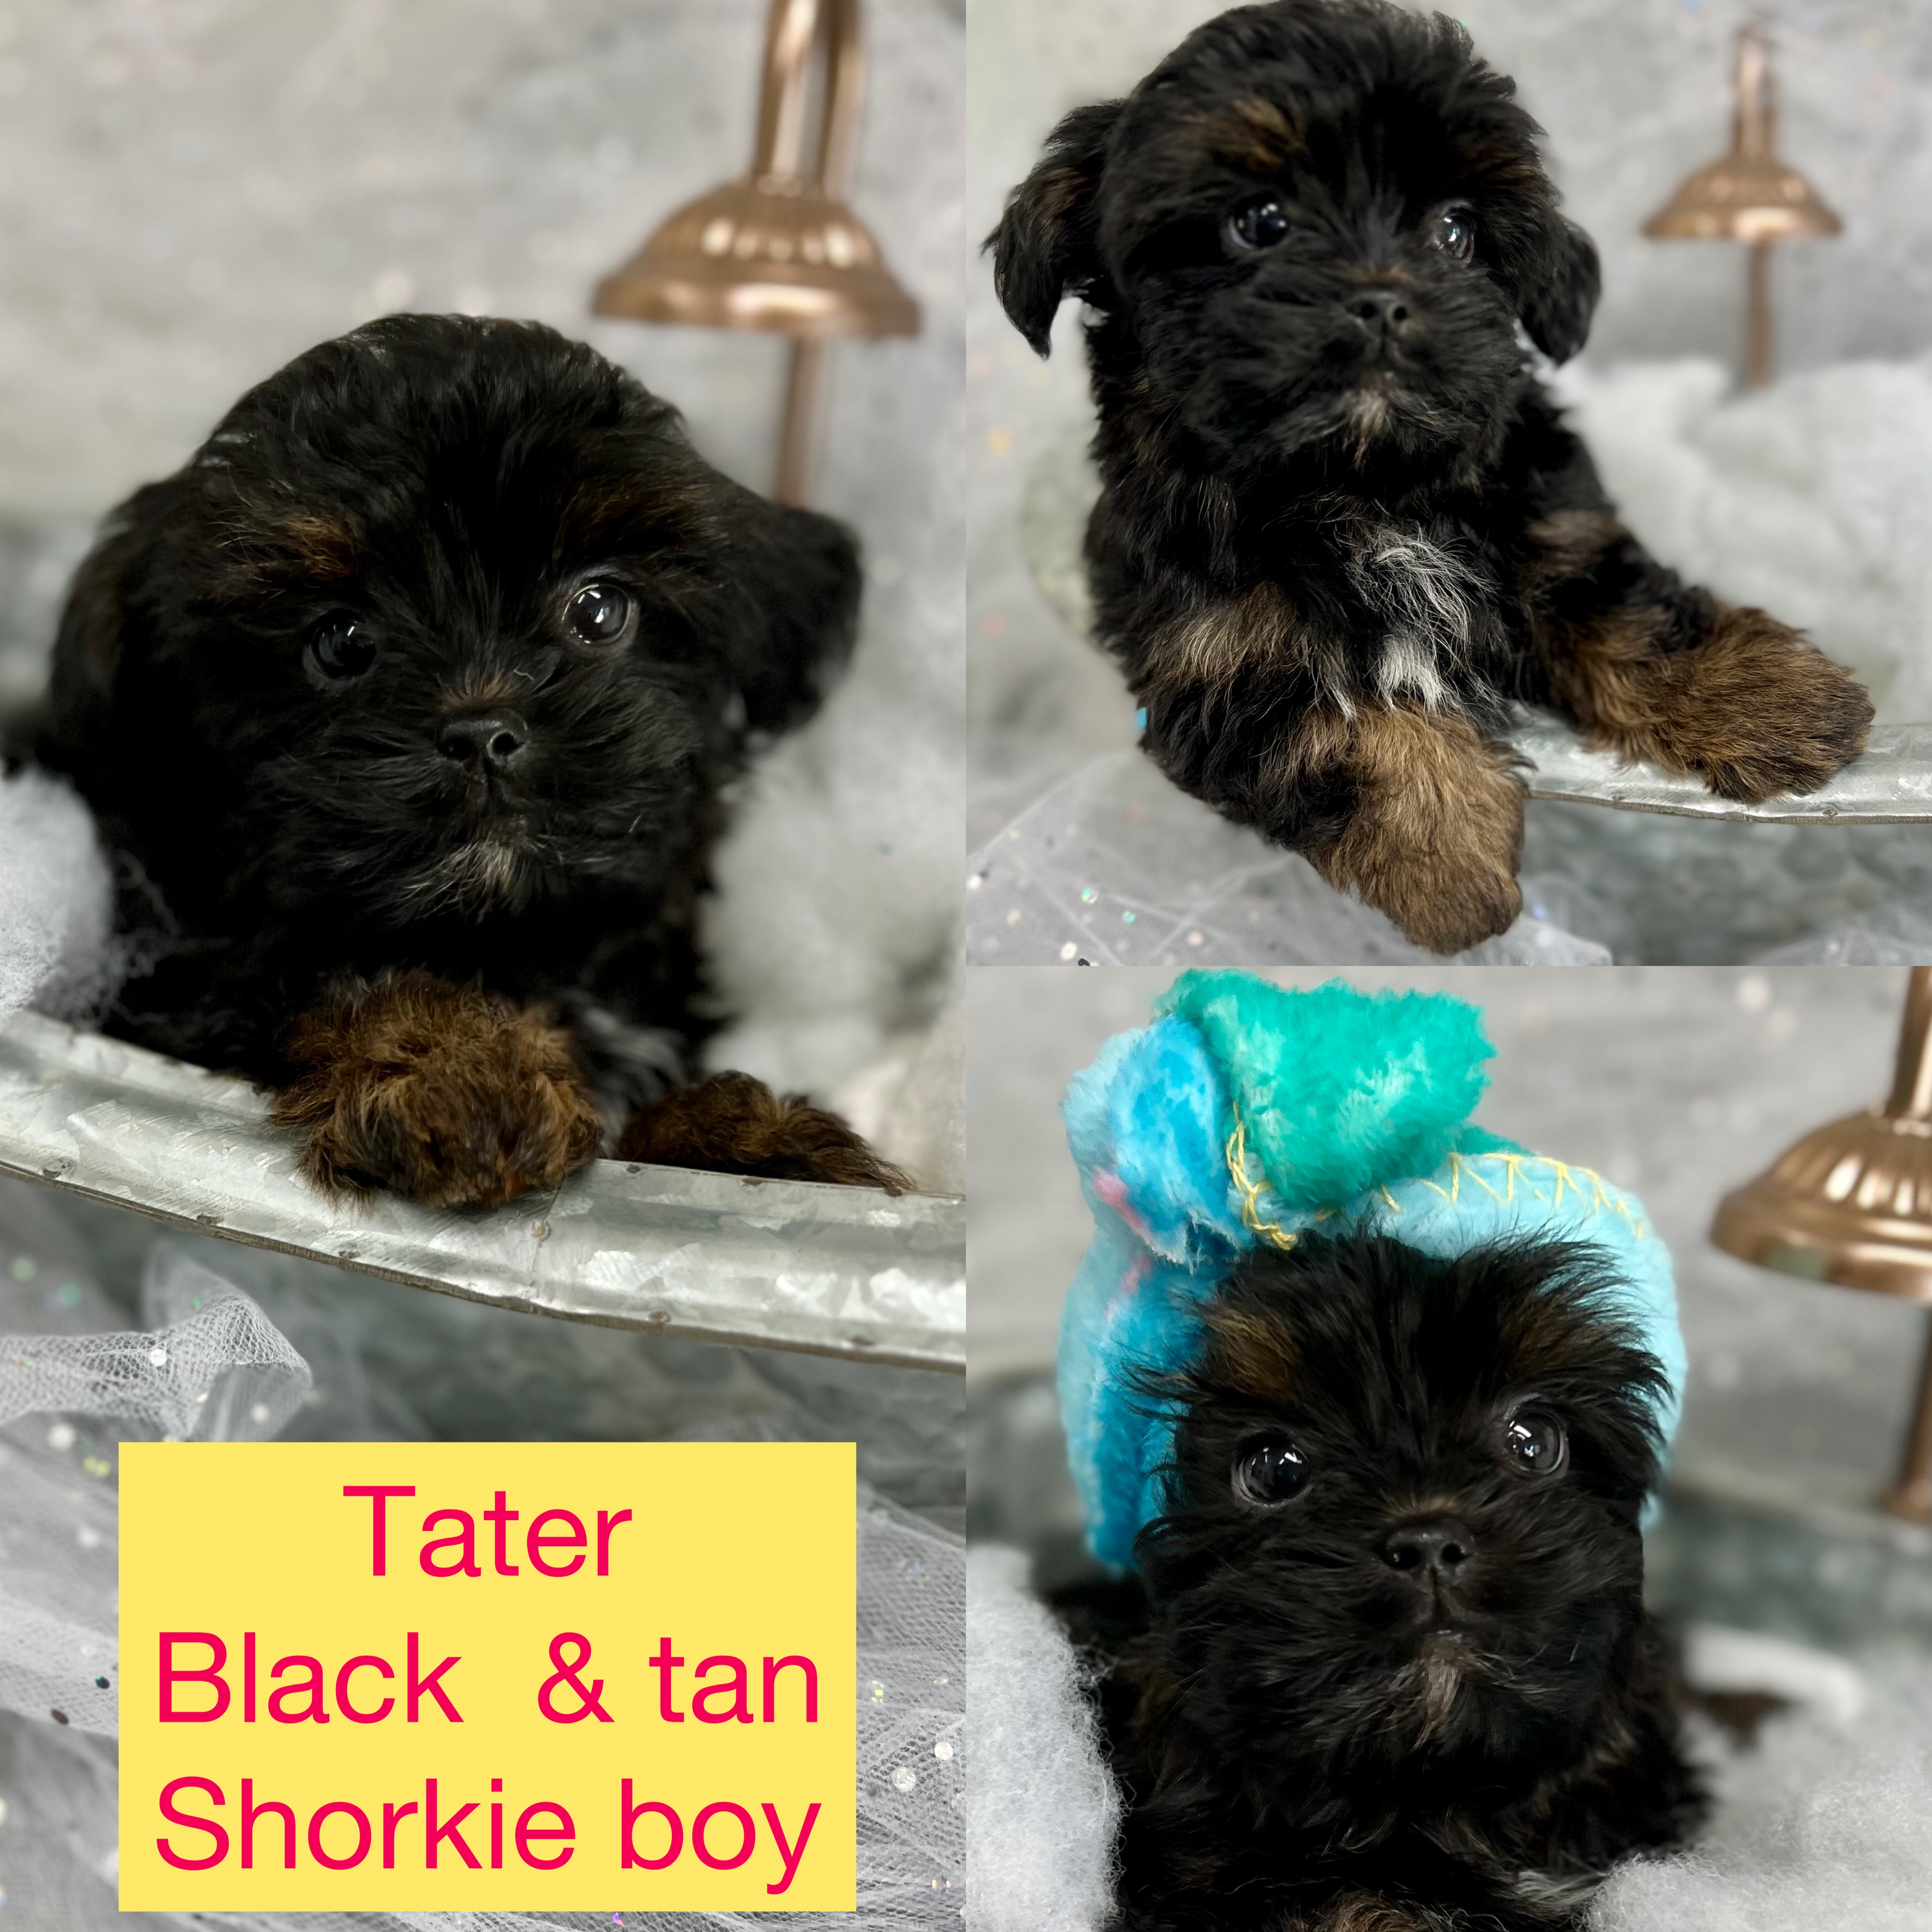 Tater is ADOPTED